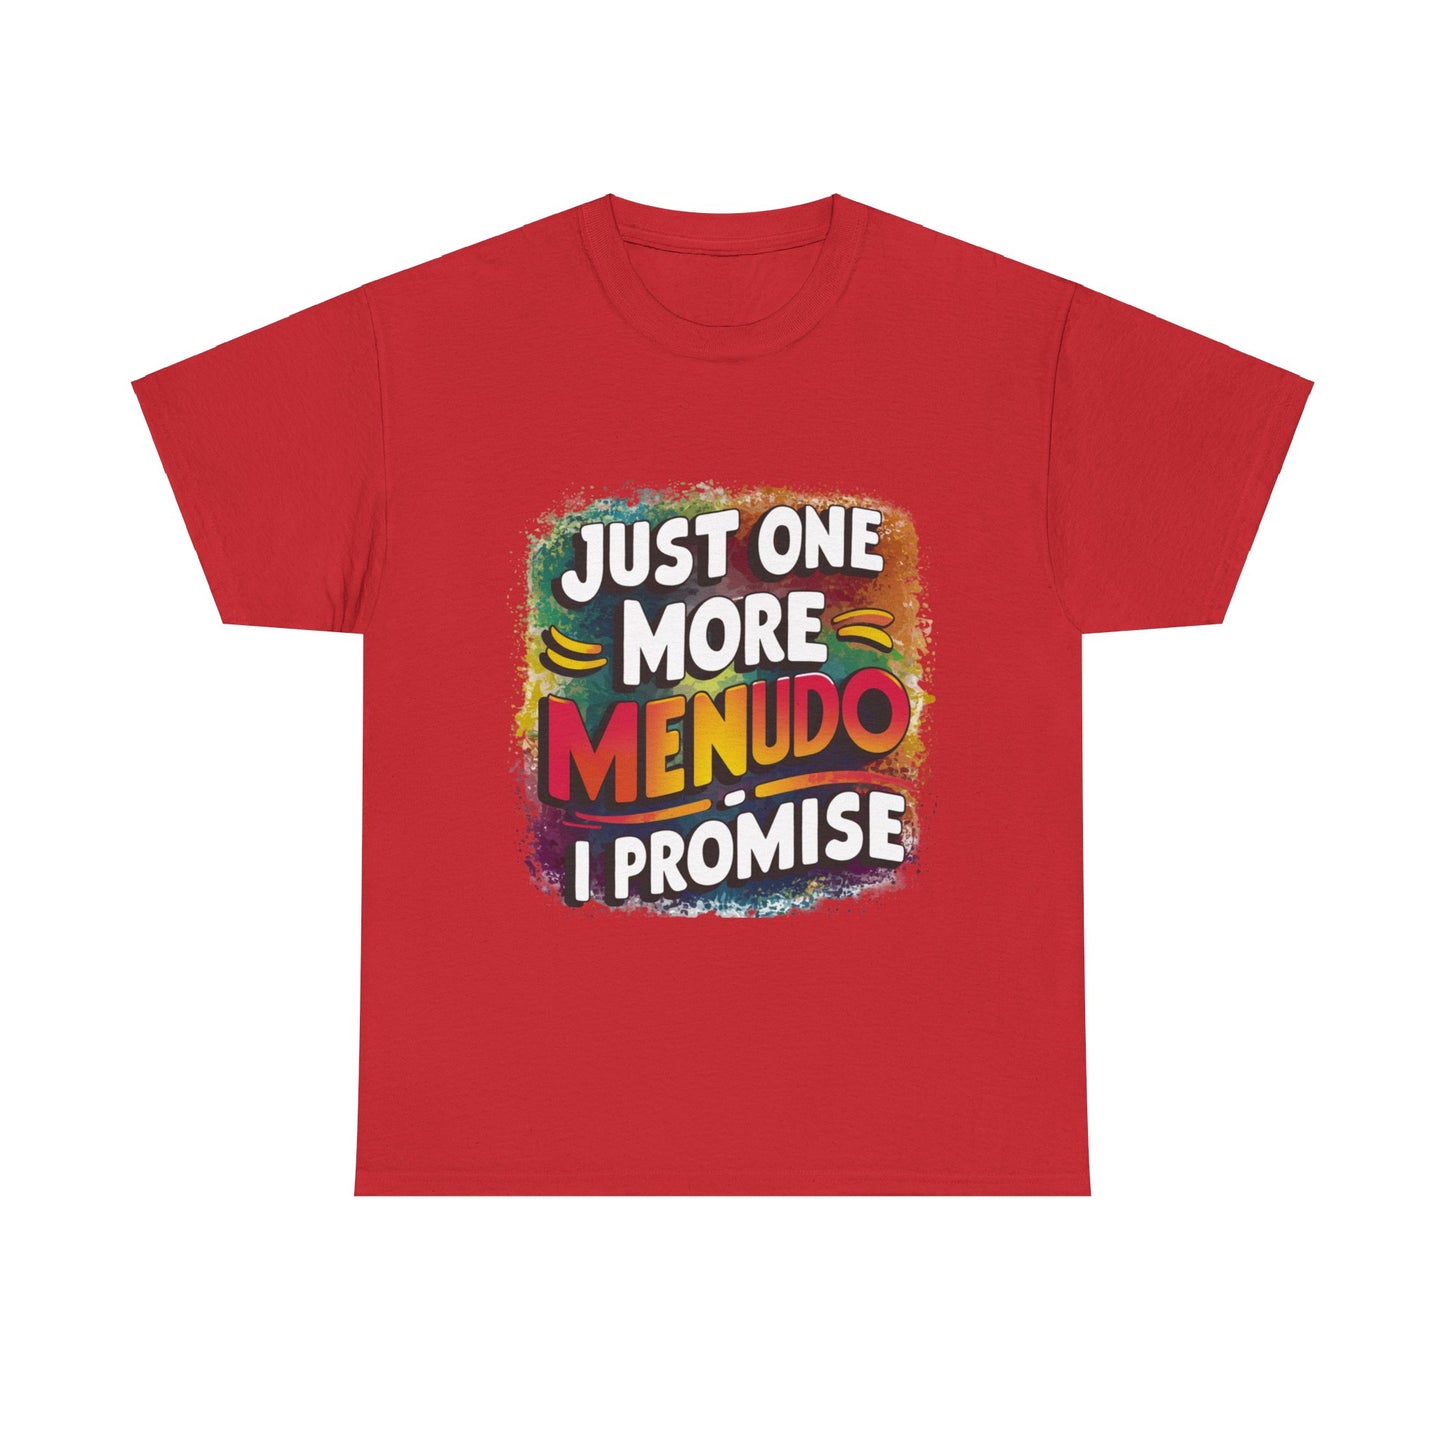 Just One More Menudo I Promise Mexican Food Graphic Unisex Heavy Cotton Tee Cotton Funny Humorous Graphic Soft Premium Unisex Men Women Red T-shirt Birthday Gift-7